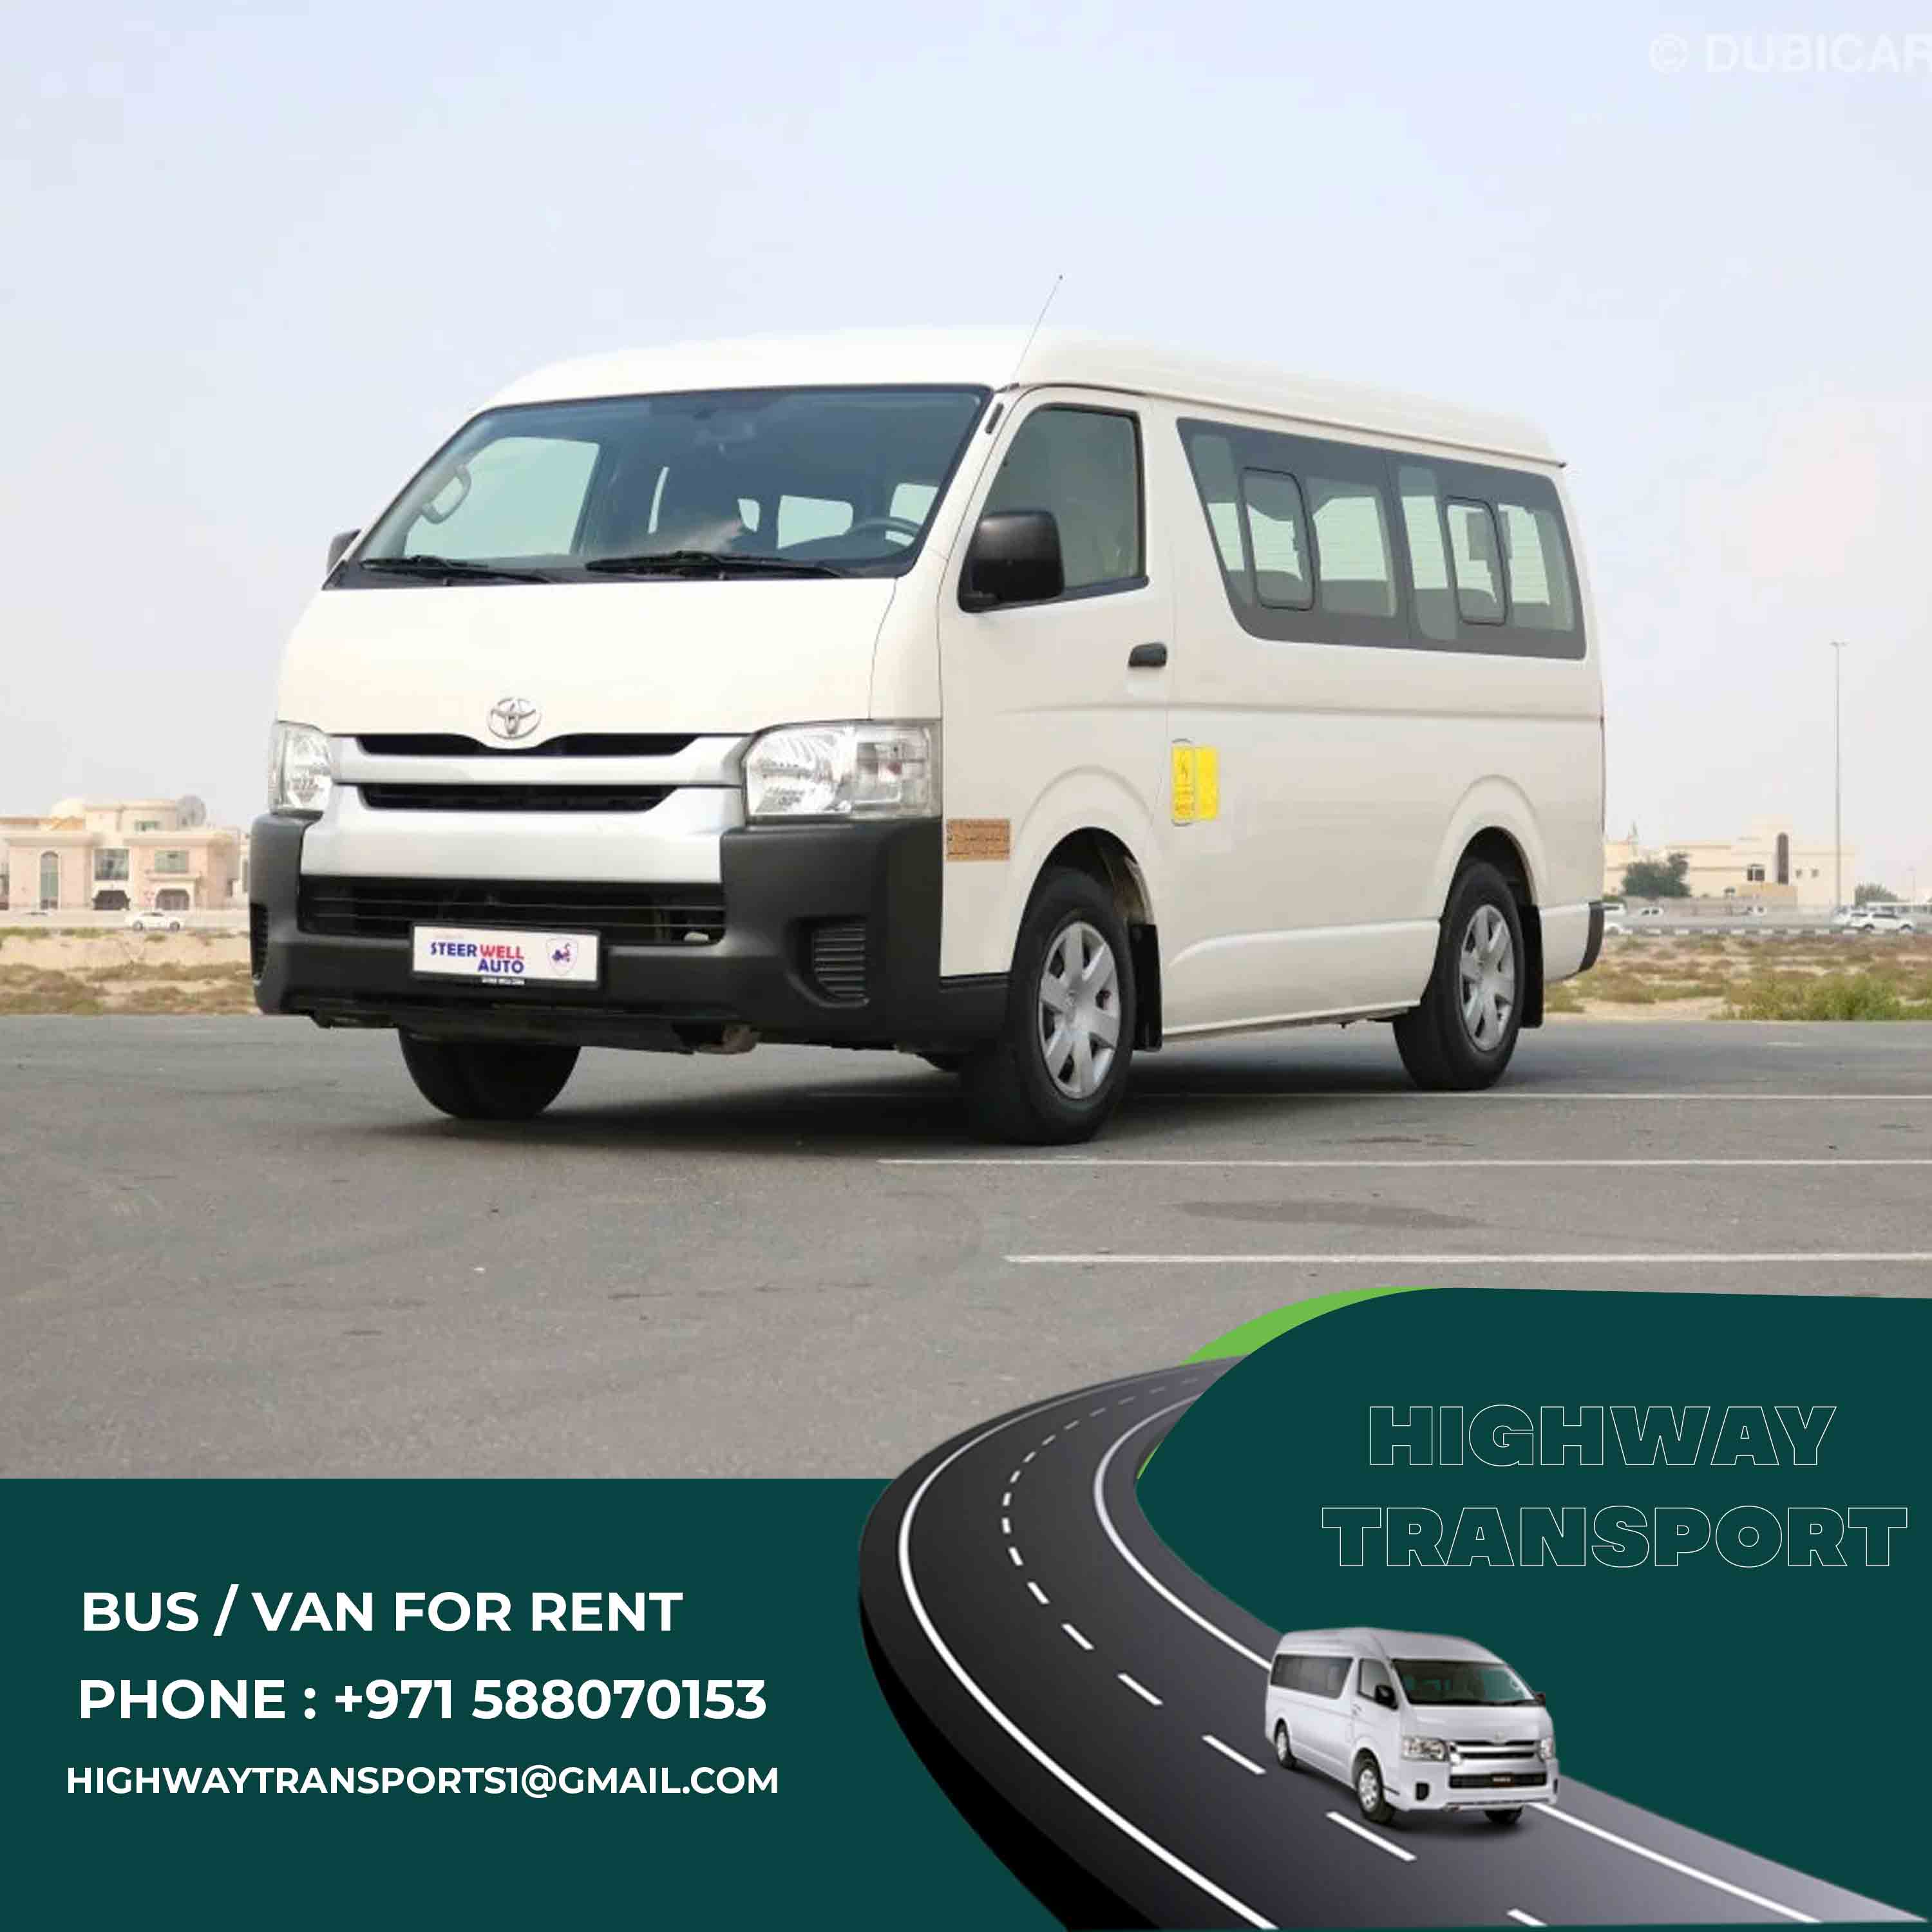 15 seater van for sale in UAE - spacious and reliable transportation option